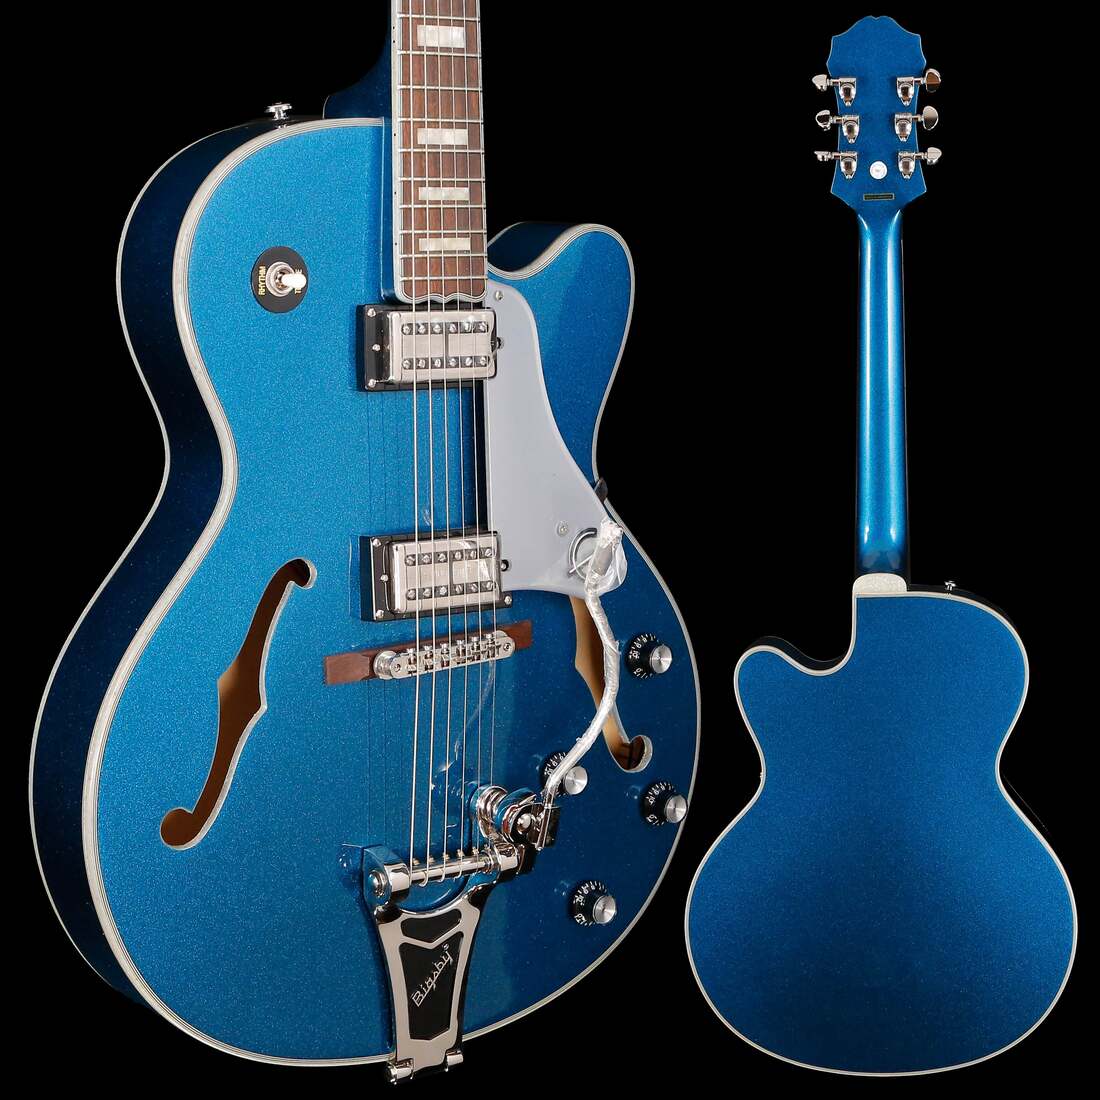 Epiphone Swingster Review